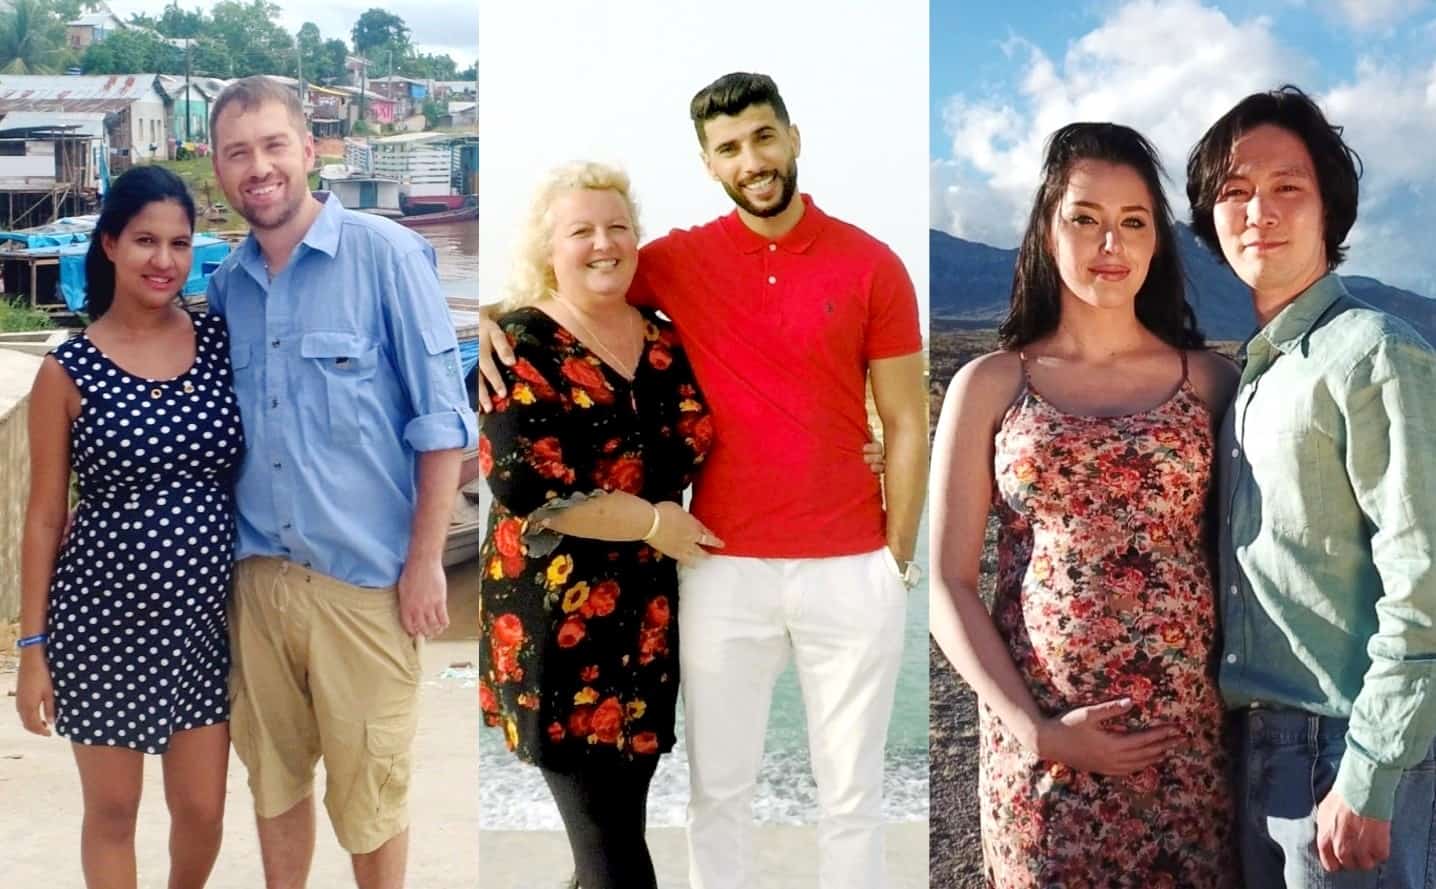 PHOTOS - Meet the Cast of TLC's 90 Day Fiance: The Other Way! Features Paul and Karine